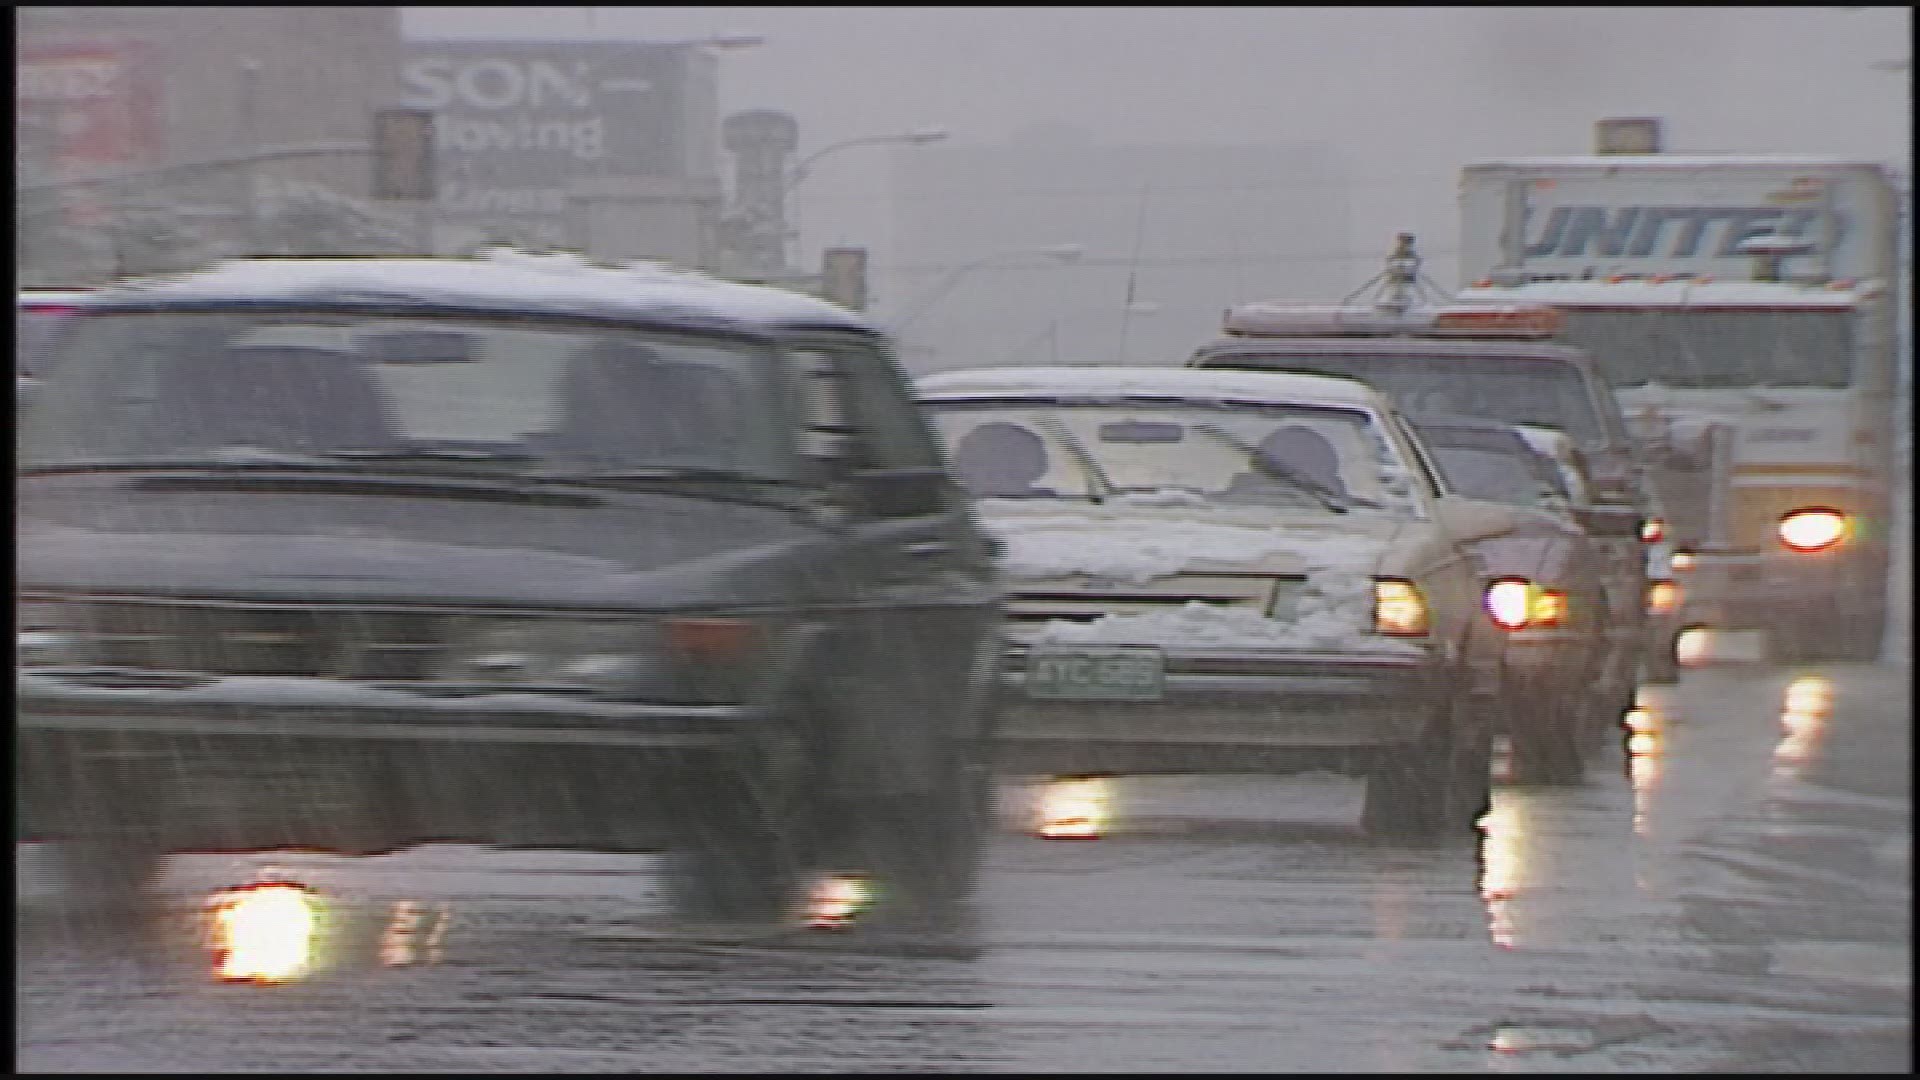 From the 9NEWS archives, here's a look at a piece when 2.3 inches of snow fell on the Mile High City on Sept. 12, 1989.